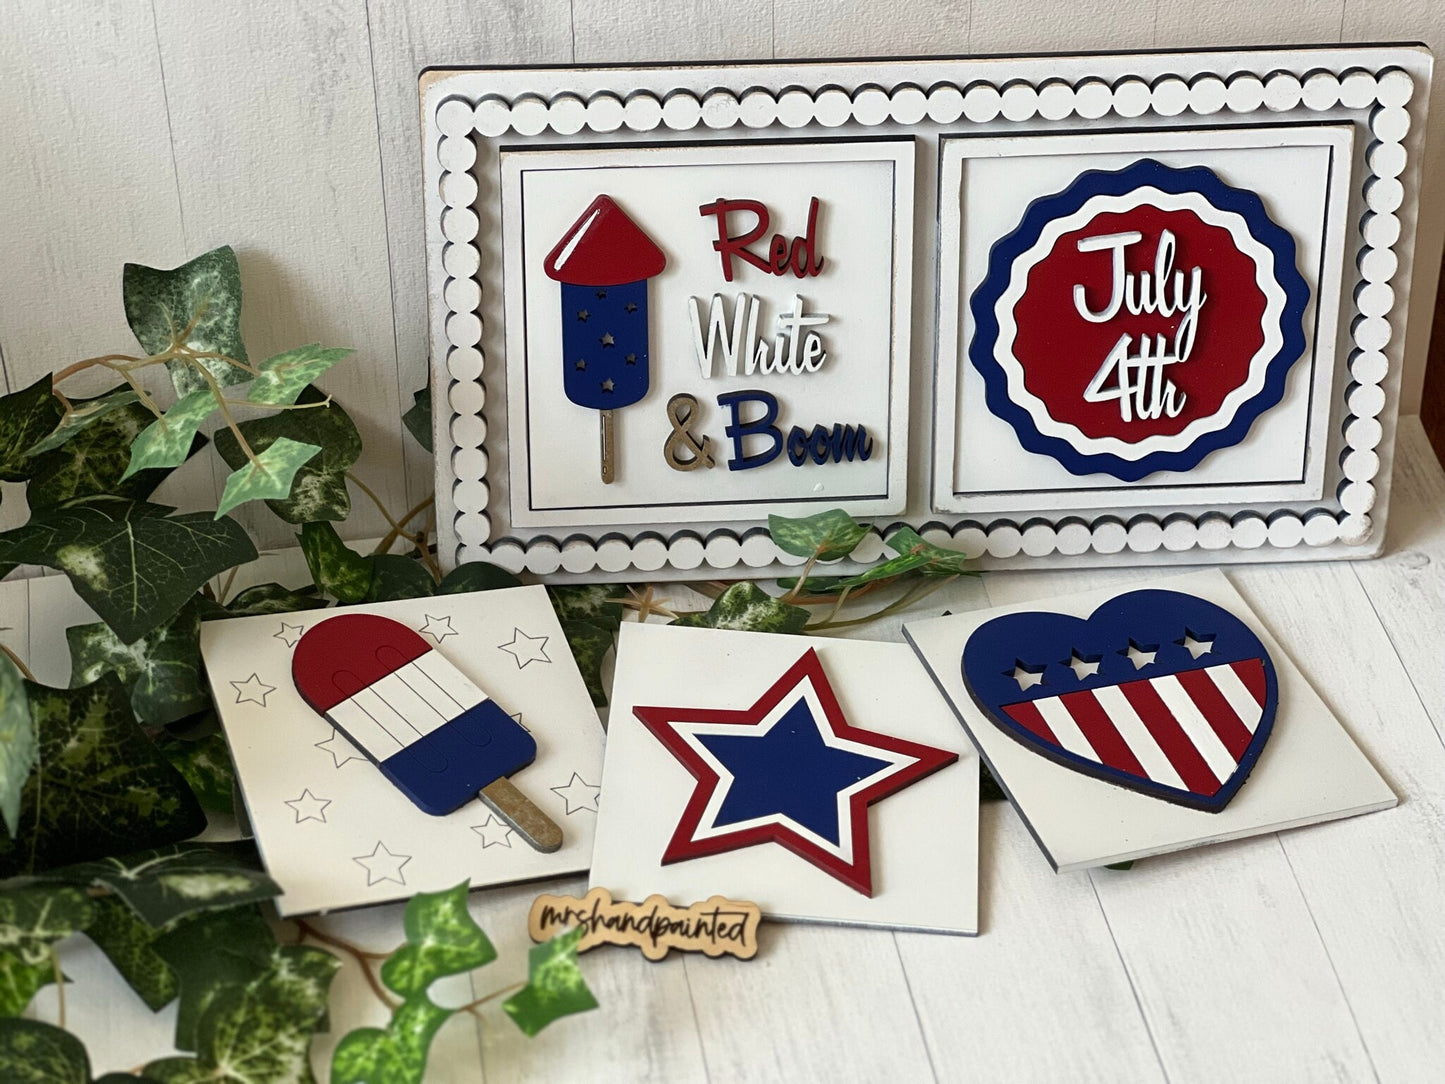 Independence Day / 4th of July Leaning Ladder Interchangeable Signs - Laser Cut Wood Painted